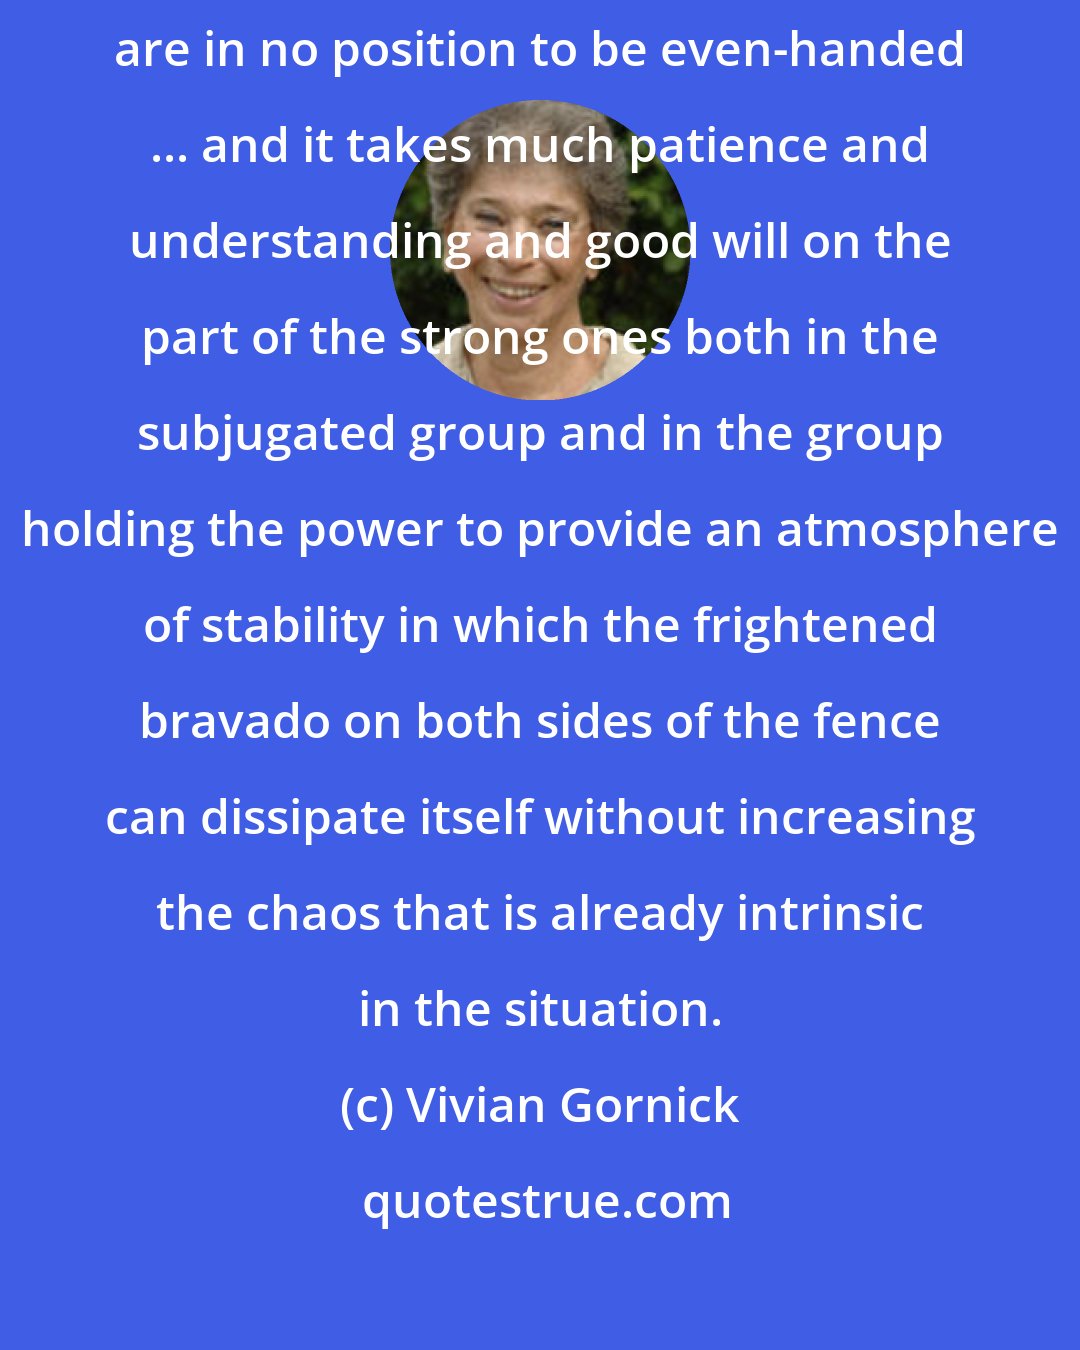 Vivian Gornick: A people who have only just begun to emerge from a state of subjugation are in no position to be even-handed ... and it takes much patience and understanding and good will on the part of the strong ones both in the subjugated group and in the group holding the power to provide an atmosphere of stability in which the frightened bravado on both sides of the fence can dissipate itself without increasing the chaos that is already intrinsic in the situation.